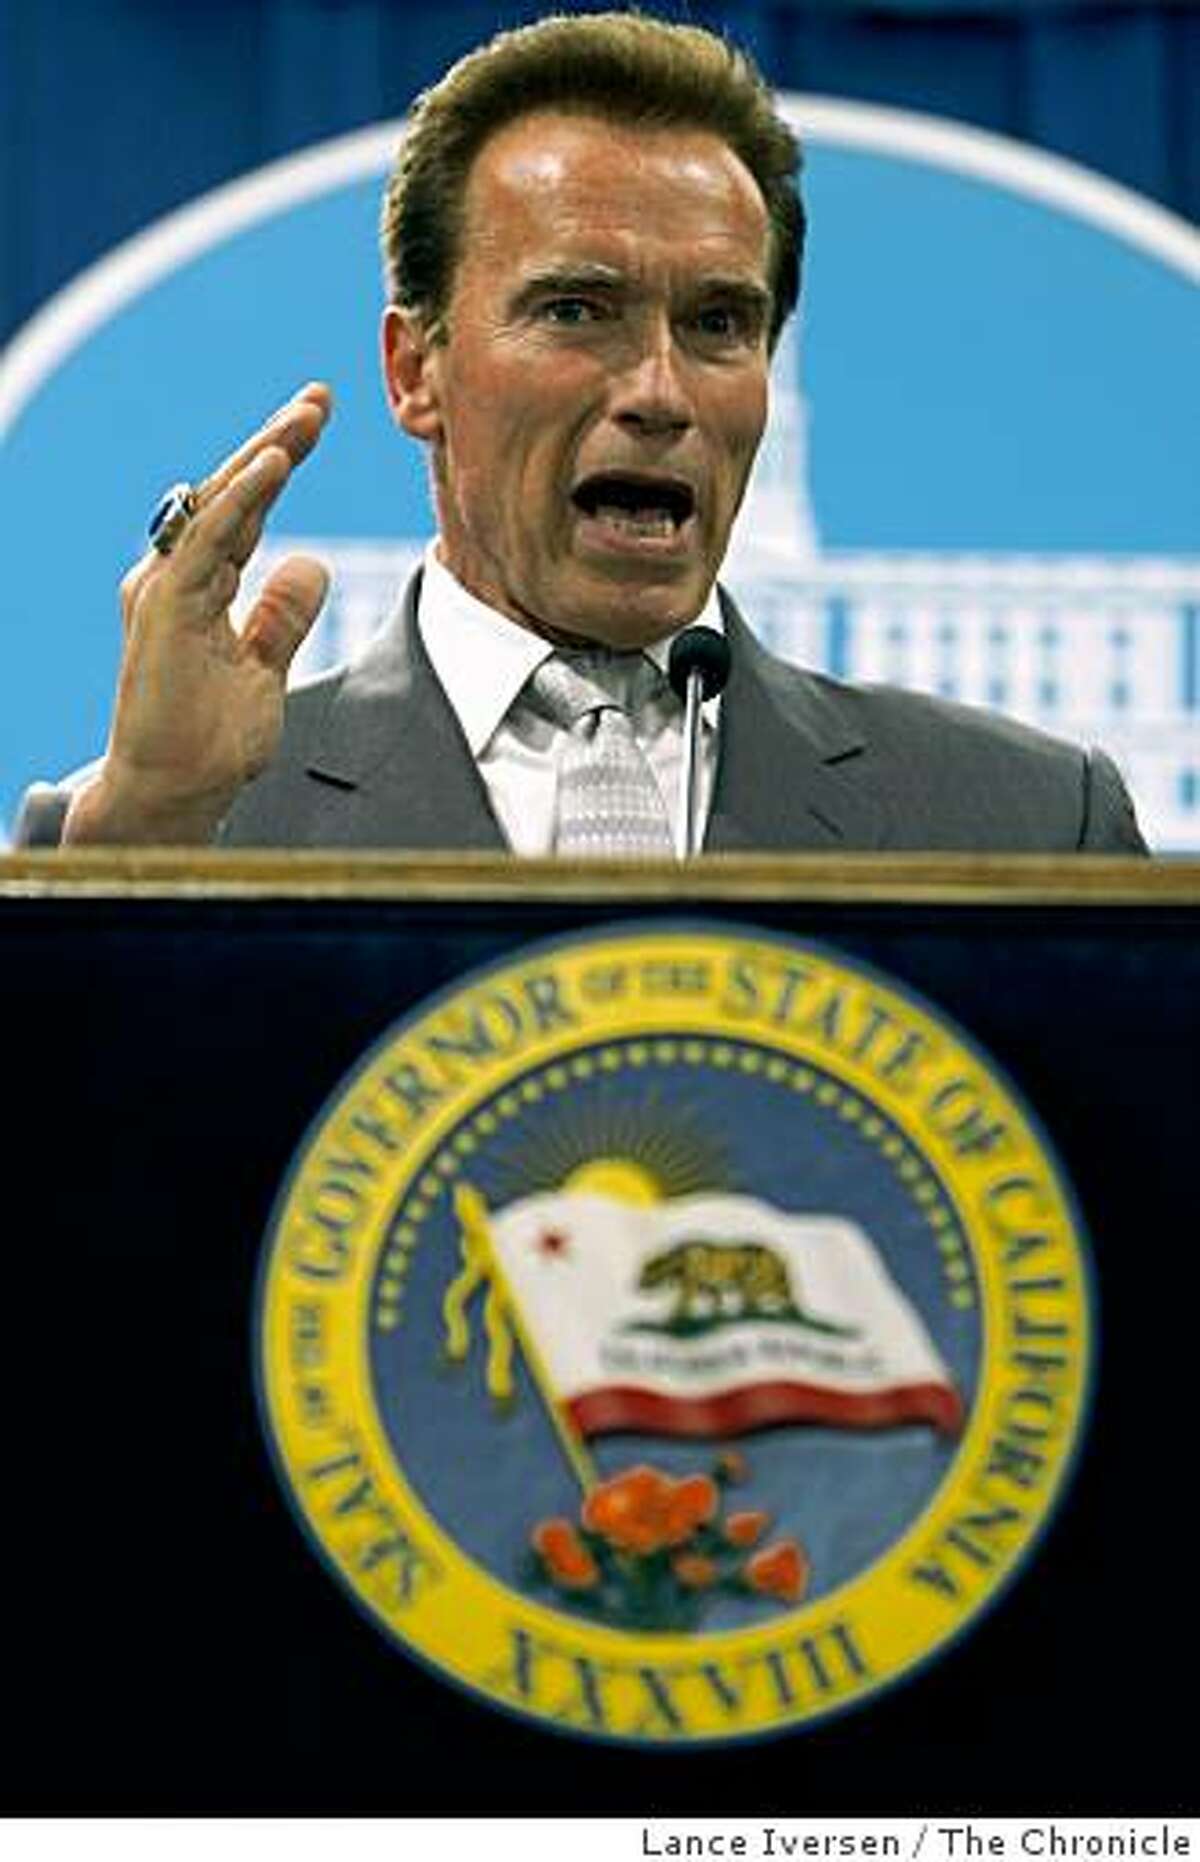 Governor Arnold Schwarzenegger presented his latest revised versions of the California State Budget Thursday May 14, 2009 during a press conference at the State Capital in Sacramento.